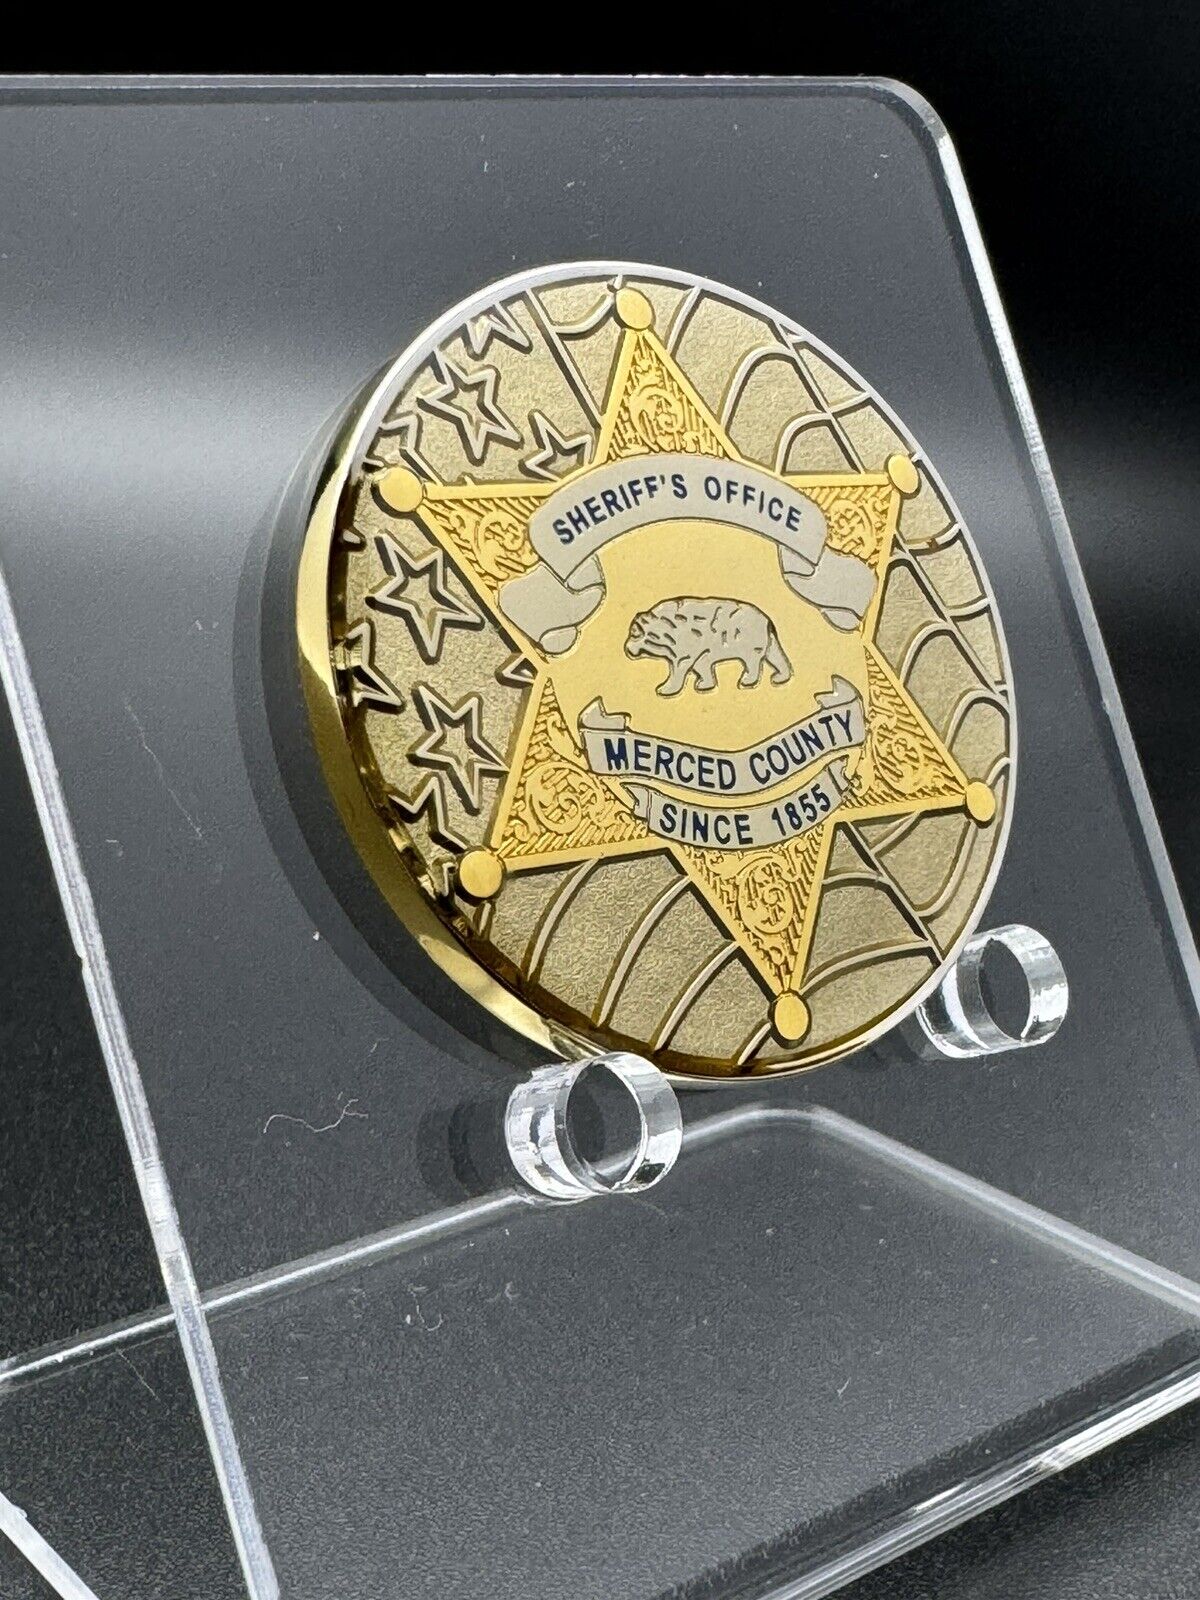 Merced County California Sheriff’s Office Challenge Coin